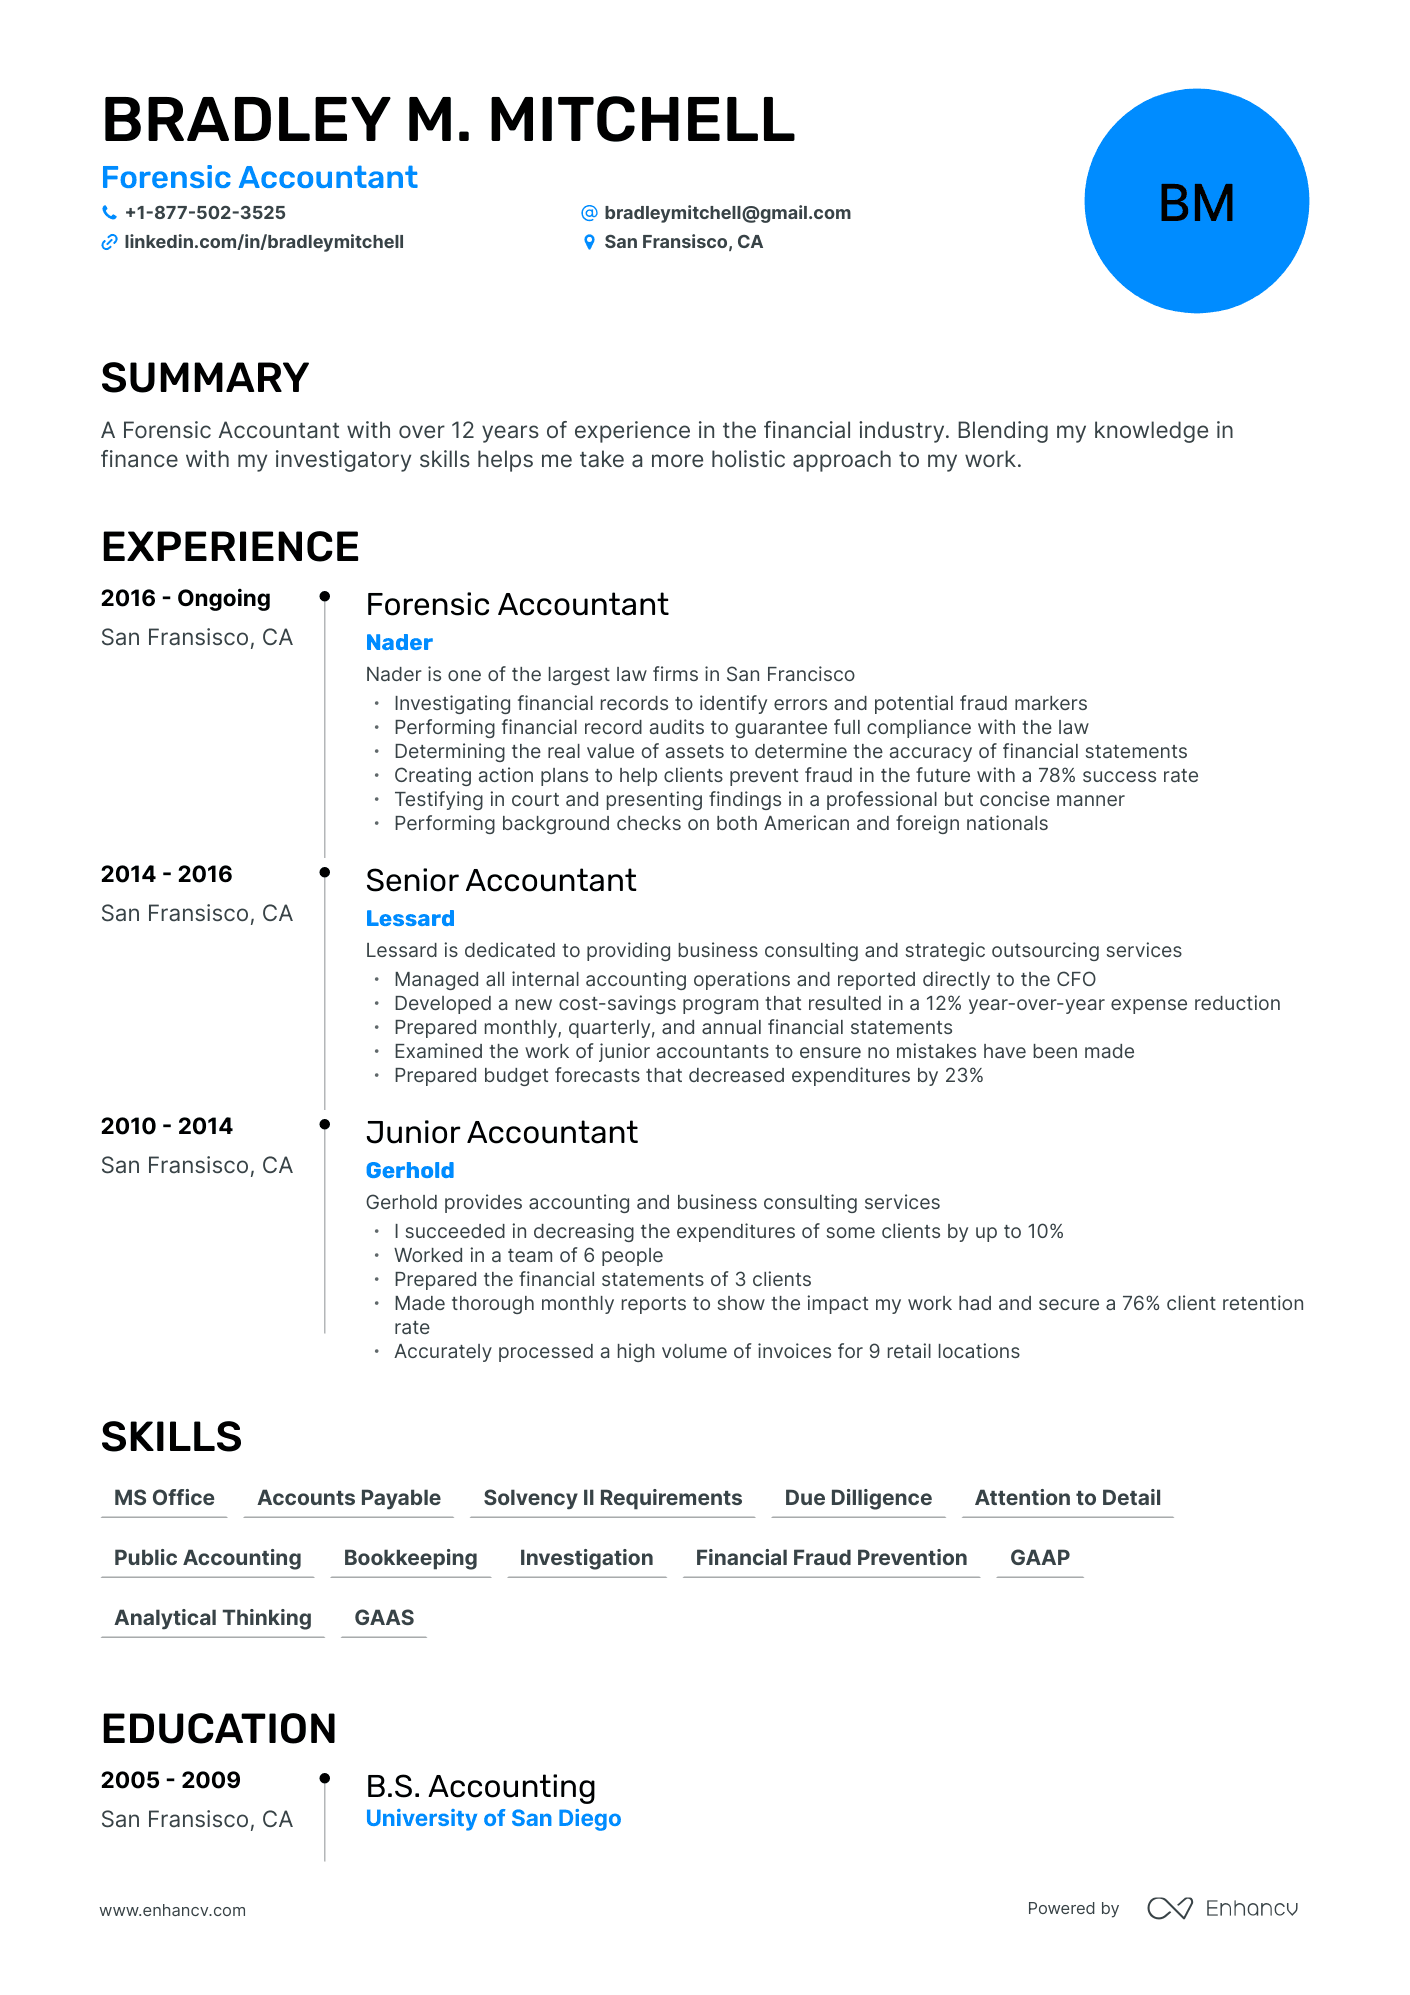 Timeline Forensic Accounting Resume Template